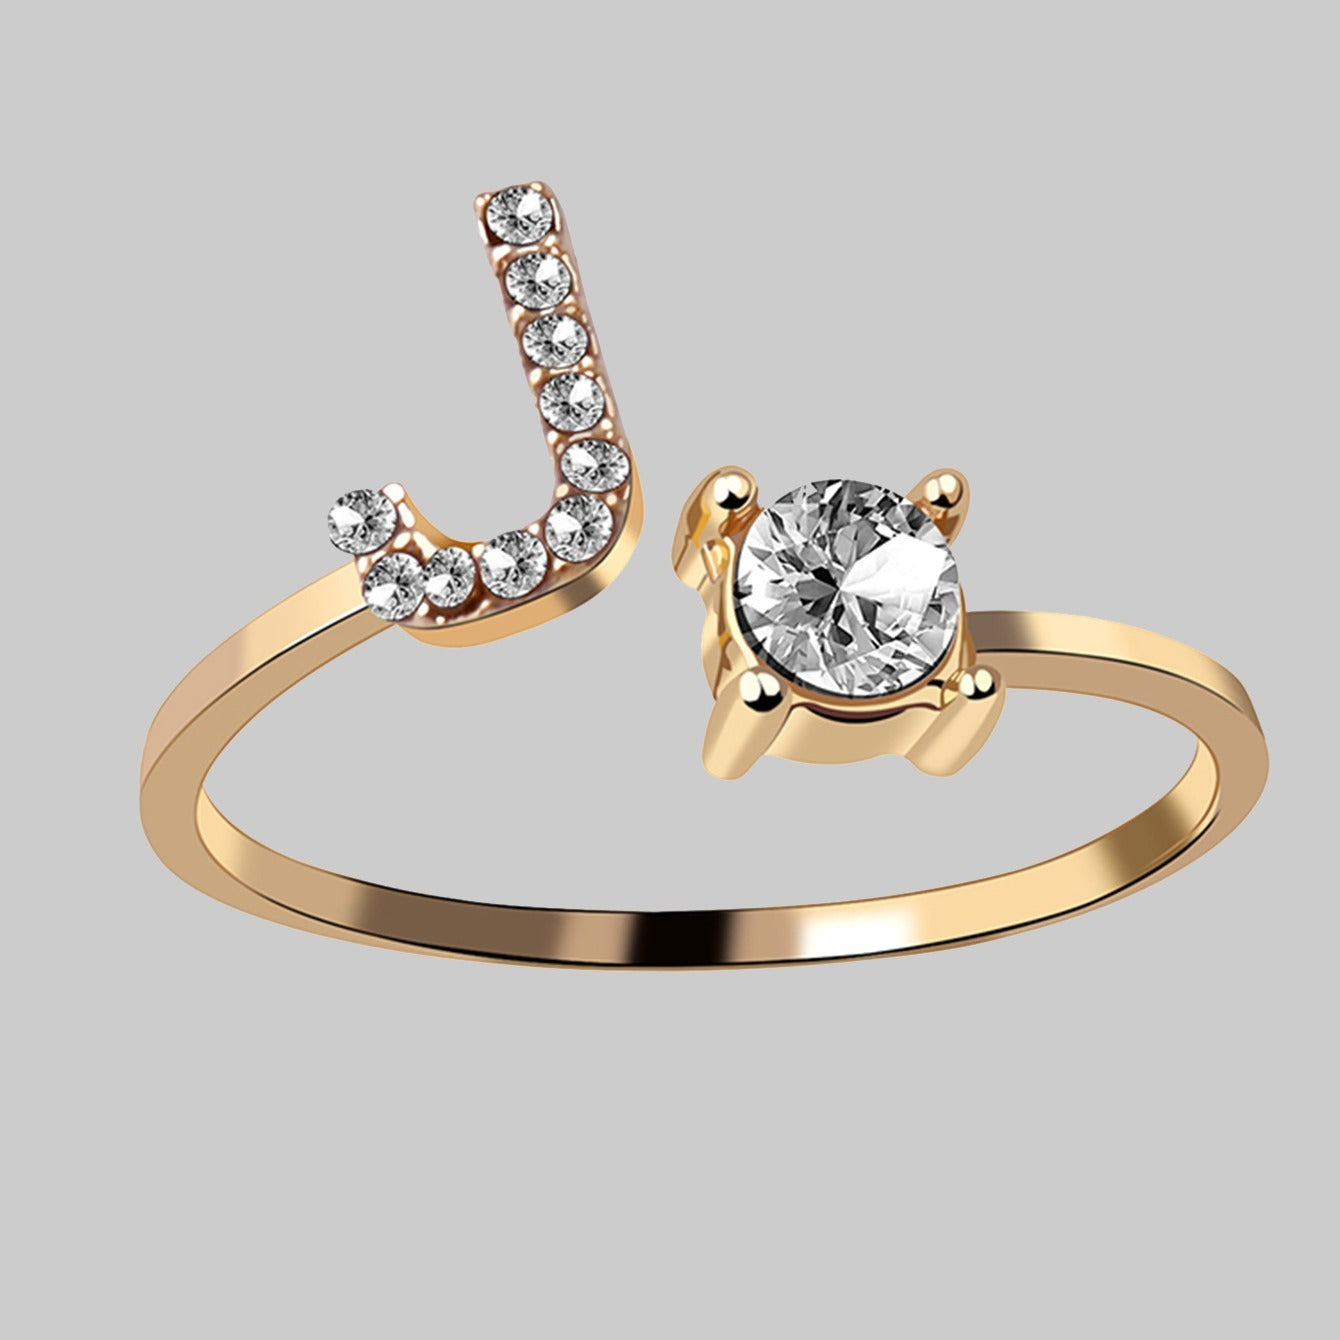 Shine Bright with Our Golden Zircon and Rhinestone Studded 26 Letters Open Adjustable Ring - Perfect Gift for Women